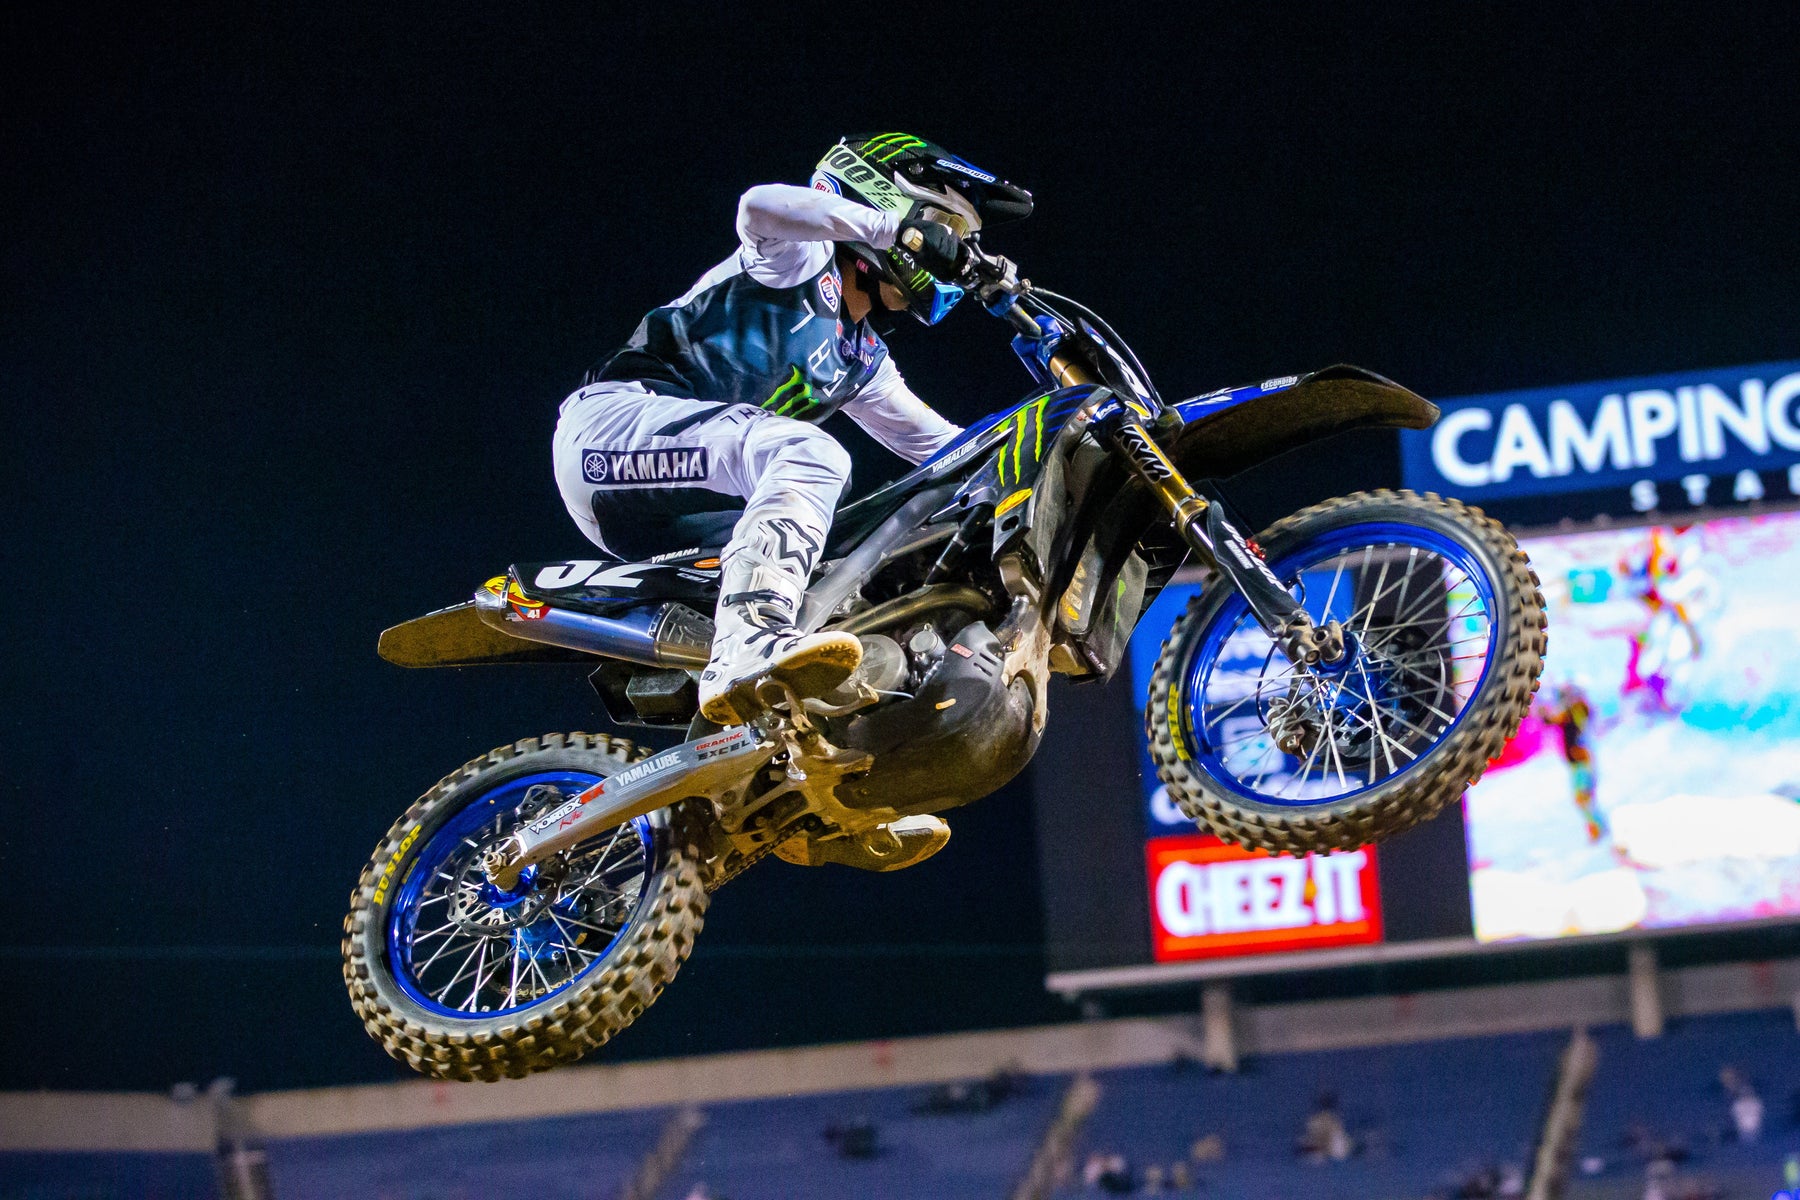 JUSTIN COOPER STORMS TO 250SX (WEST) WIN AT ORLANDO 2